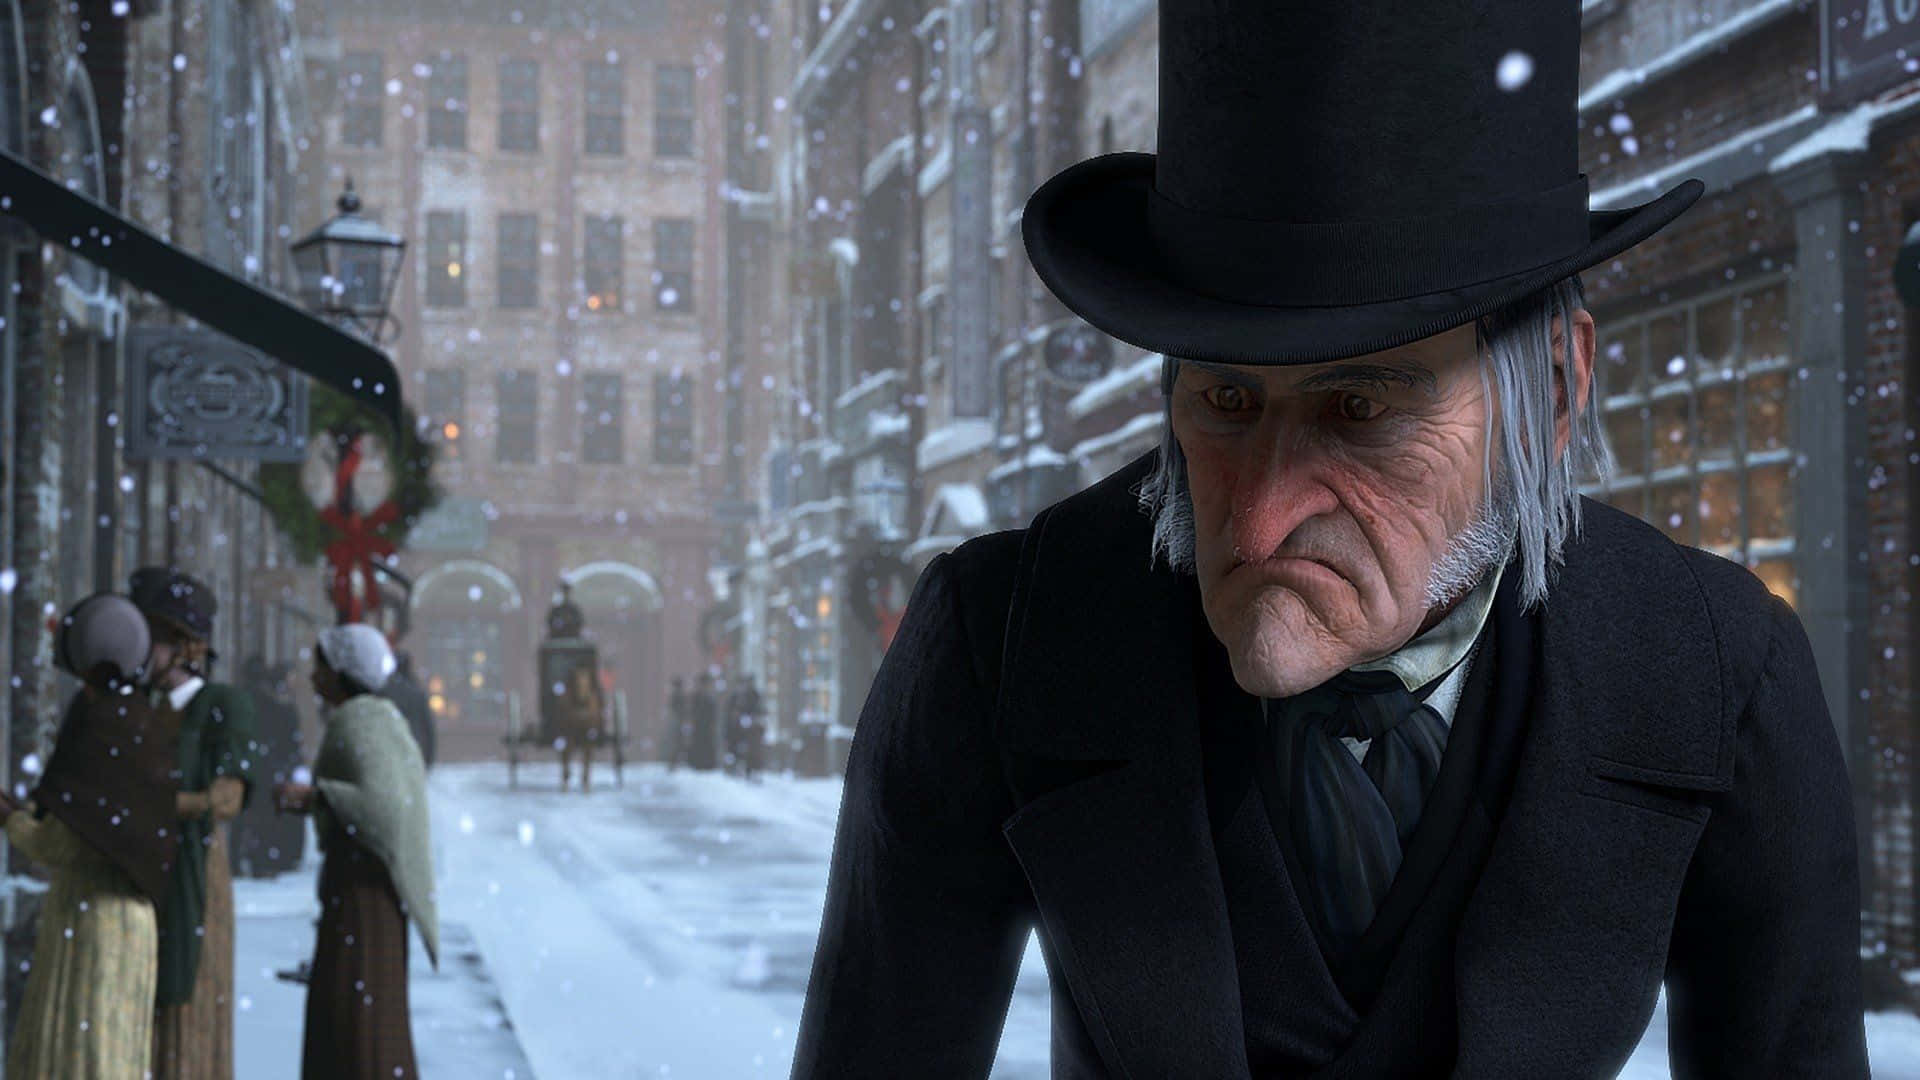 A Man In A Top Hat And A Top Hat Is Walking Down A Snowy Street